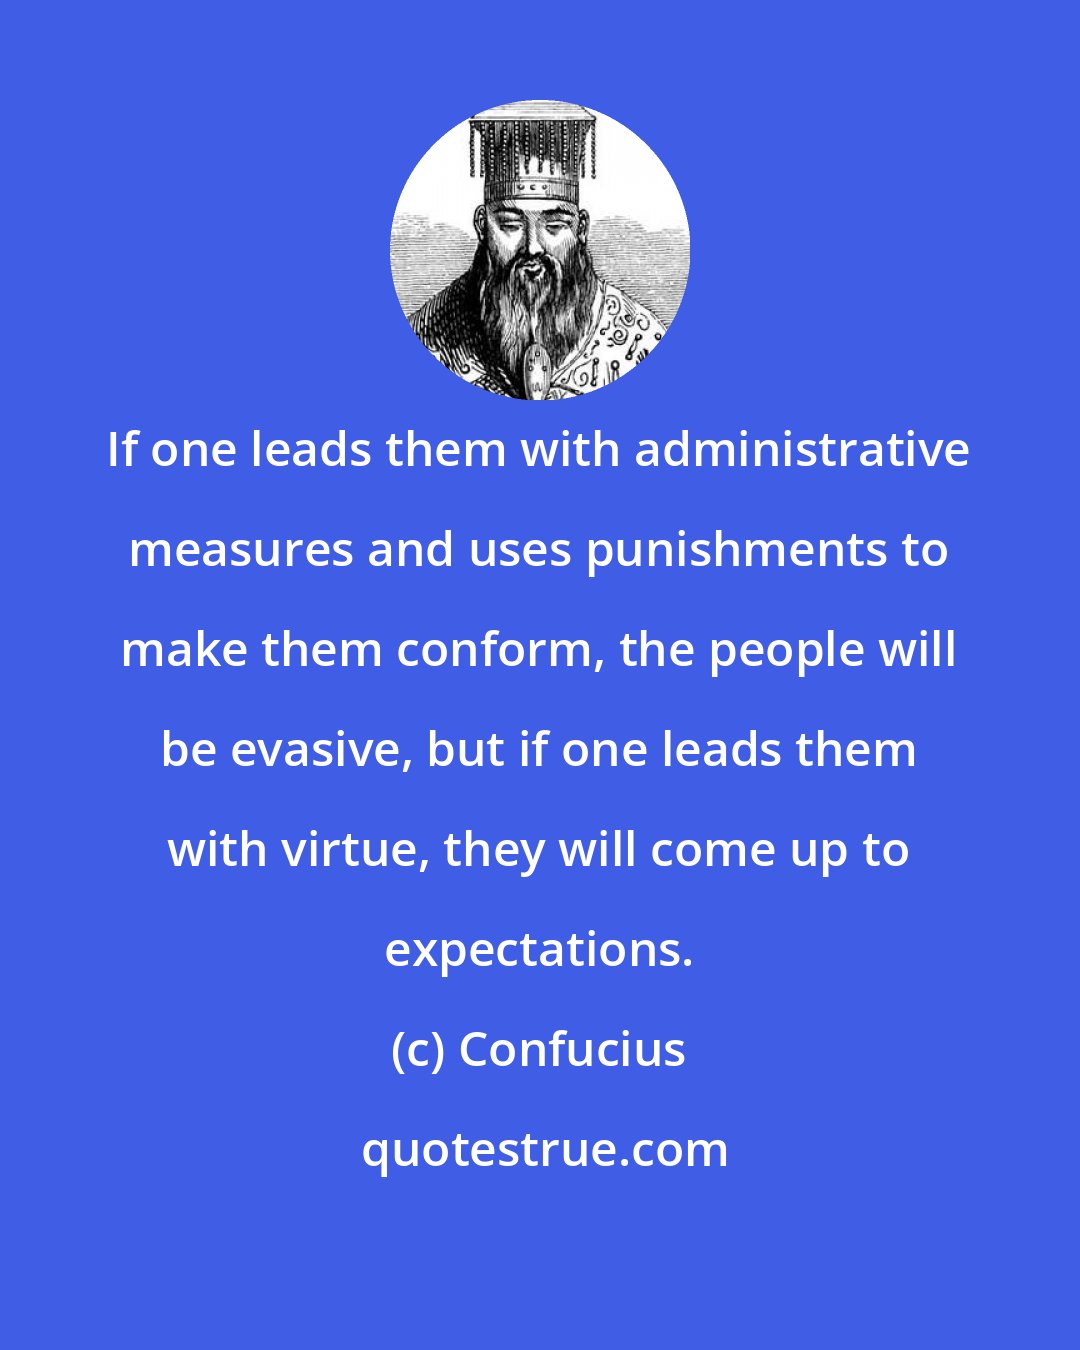 Confucius: If one leads them with administrative measures and uses punishments to make them conform, the people will be evasive, but if one leads them with virtue, they will come up to expectations.